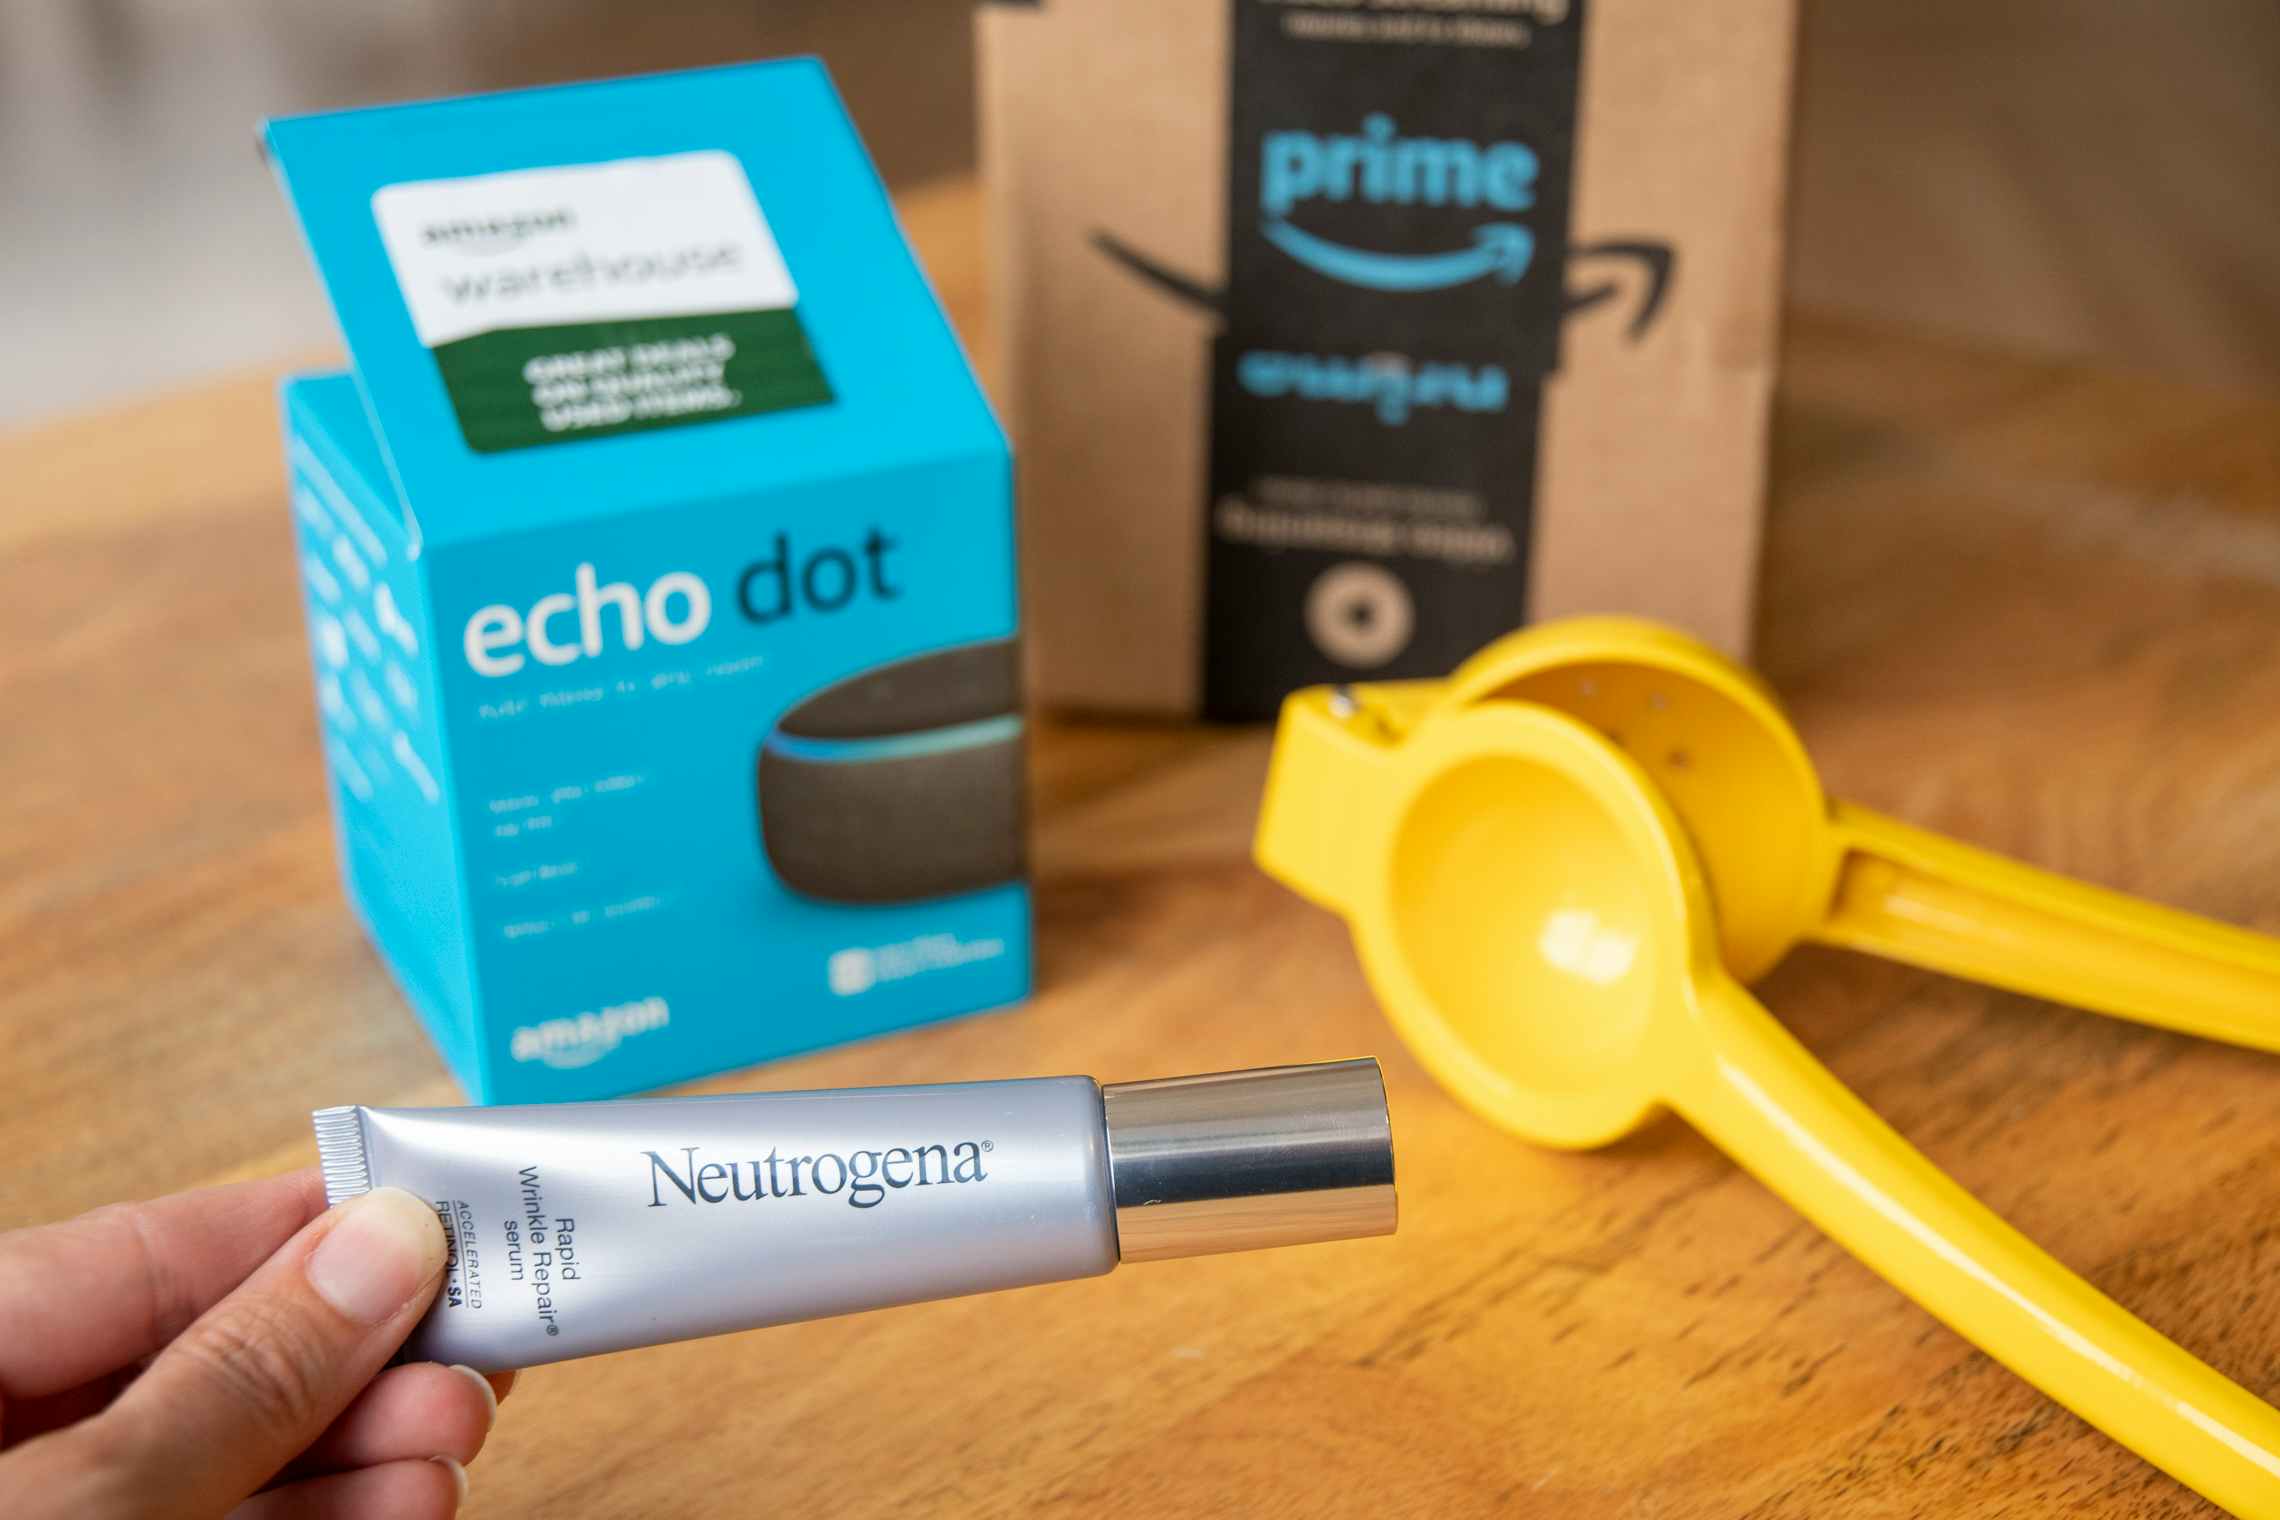 A person's hand holding a tube of Neutrogena Rapid Wrinkle Repair in front of an Echo Dot box, a kitchen utensil and an Amazon delivery box sitting on a table.